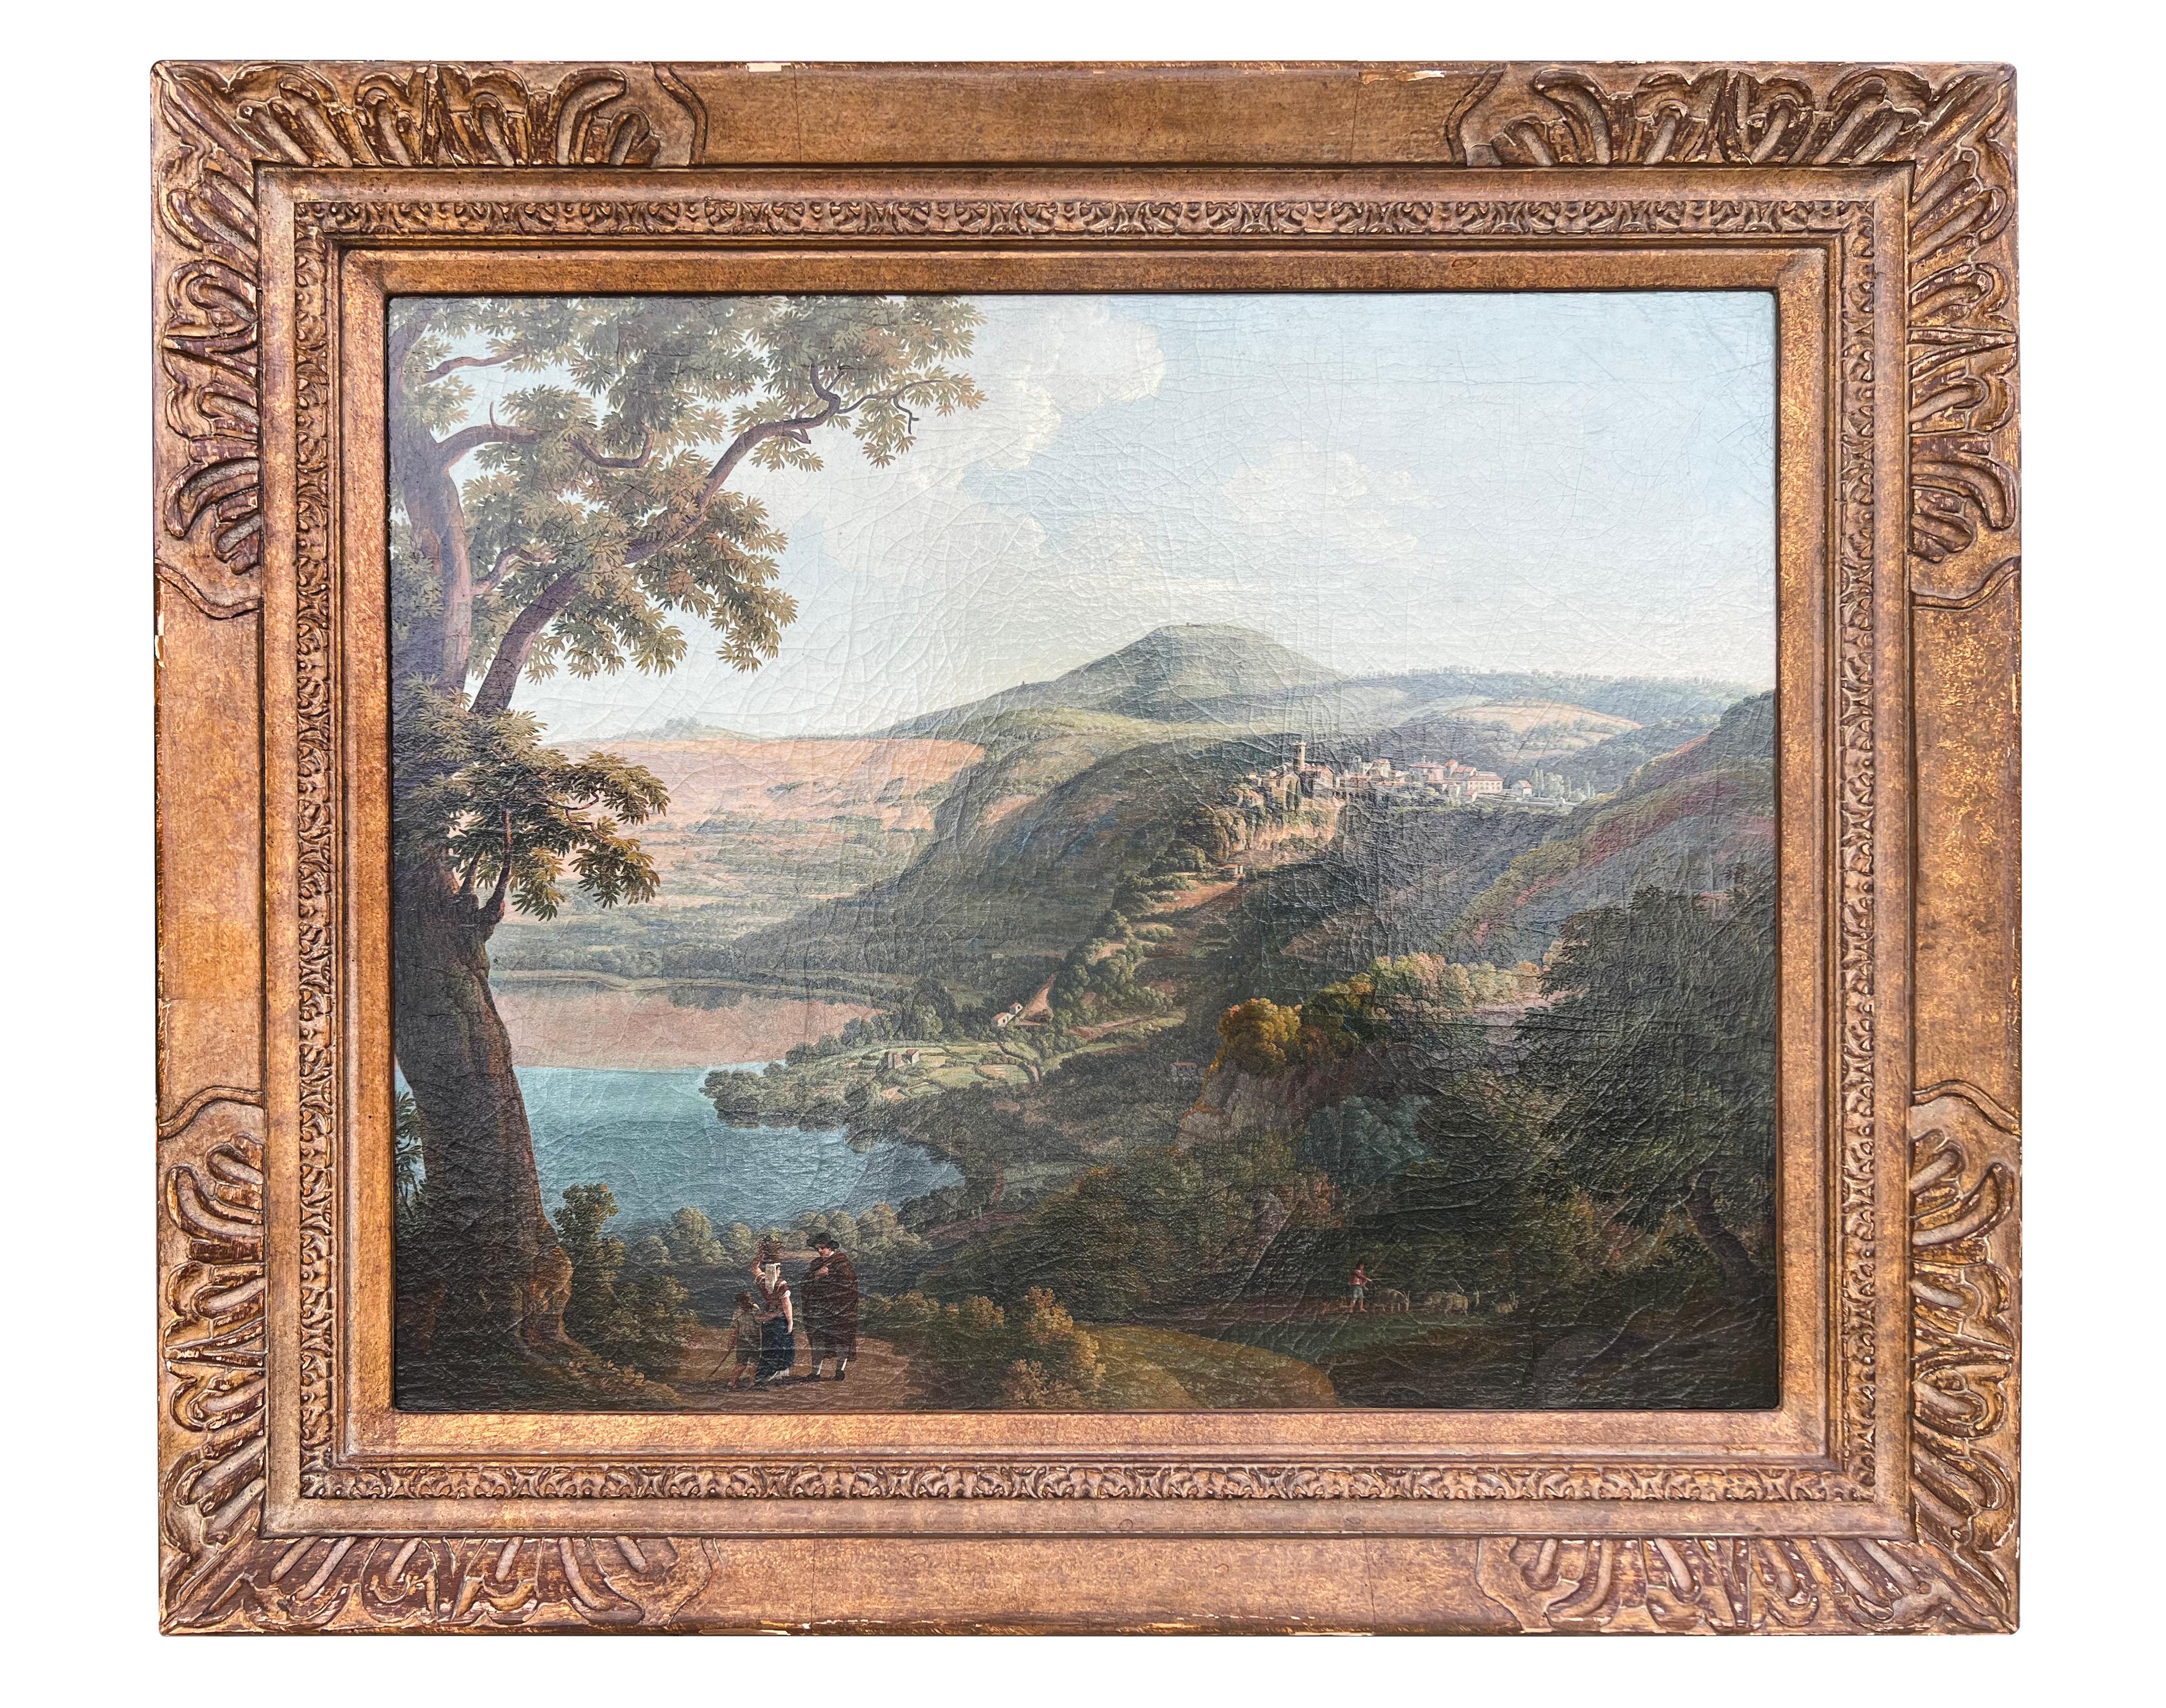 Landscape at Lake Nemi is an original painting realized by Franz Knebel in the half of the 19th century. Oil on canvas. Full title:  Landscape at lake Nemi South of Rome.  

Good conditions except for slightly soiled painting surface. Four smaller